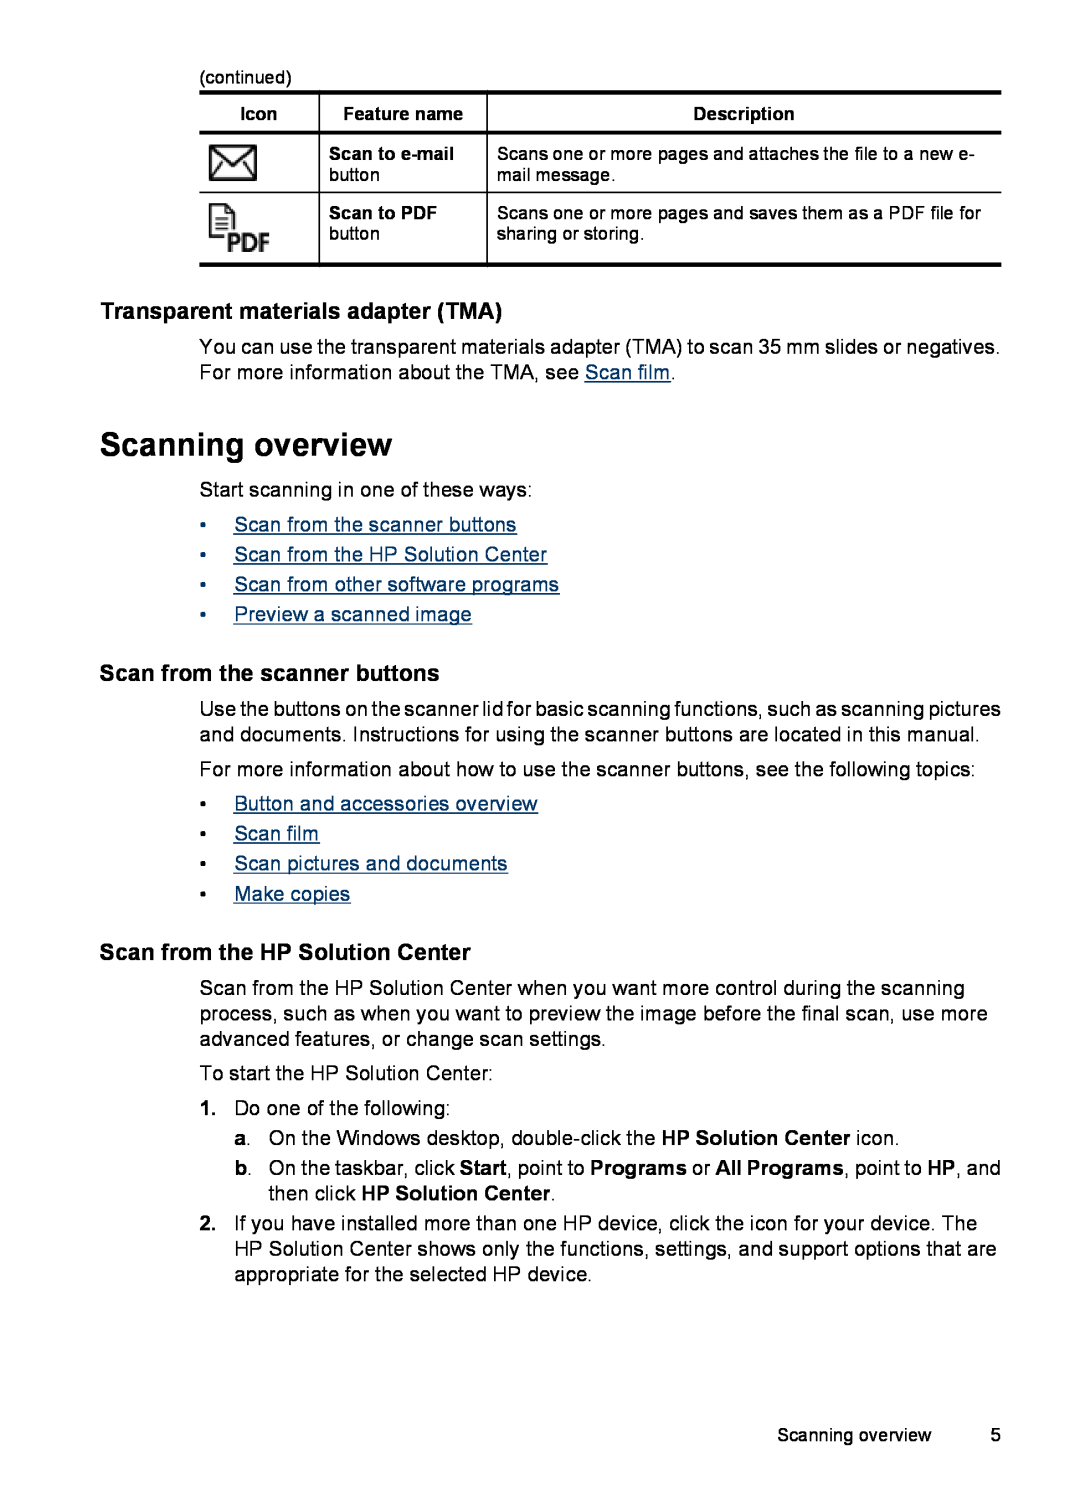 HP G3110 L2698A manual Scanning overview, Transparent materials adapter TMA, Scan from the scanner buttons, Make copies 